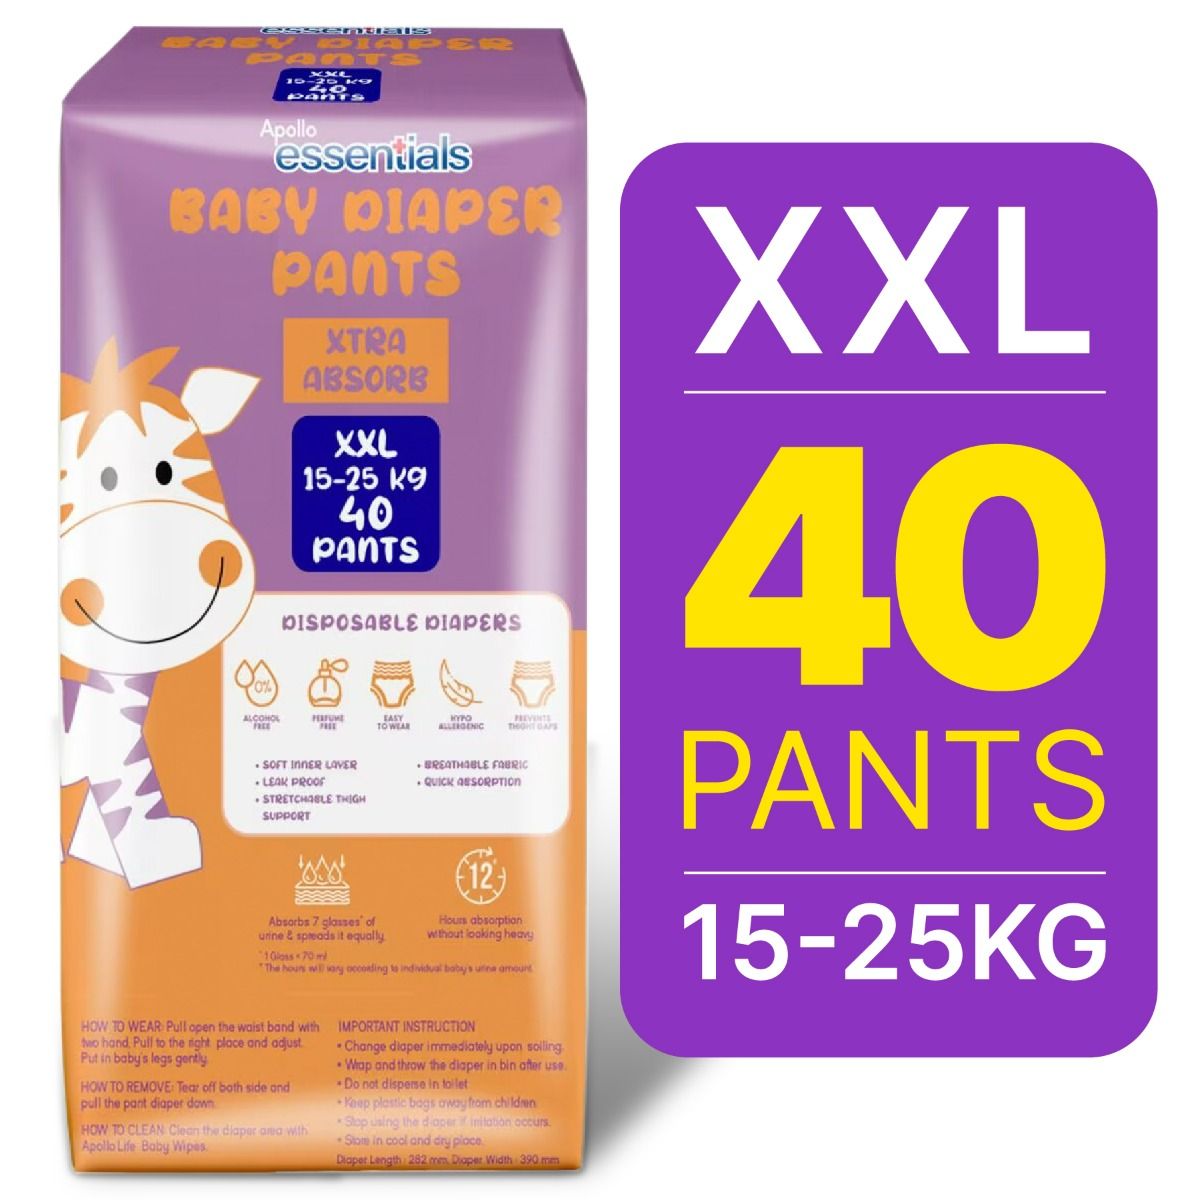 Buy Apollo Essentials Extra Absorb Baby Diaper Pants XXL, 40 Count Online